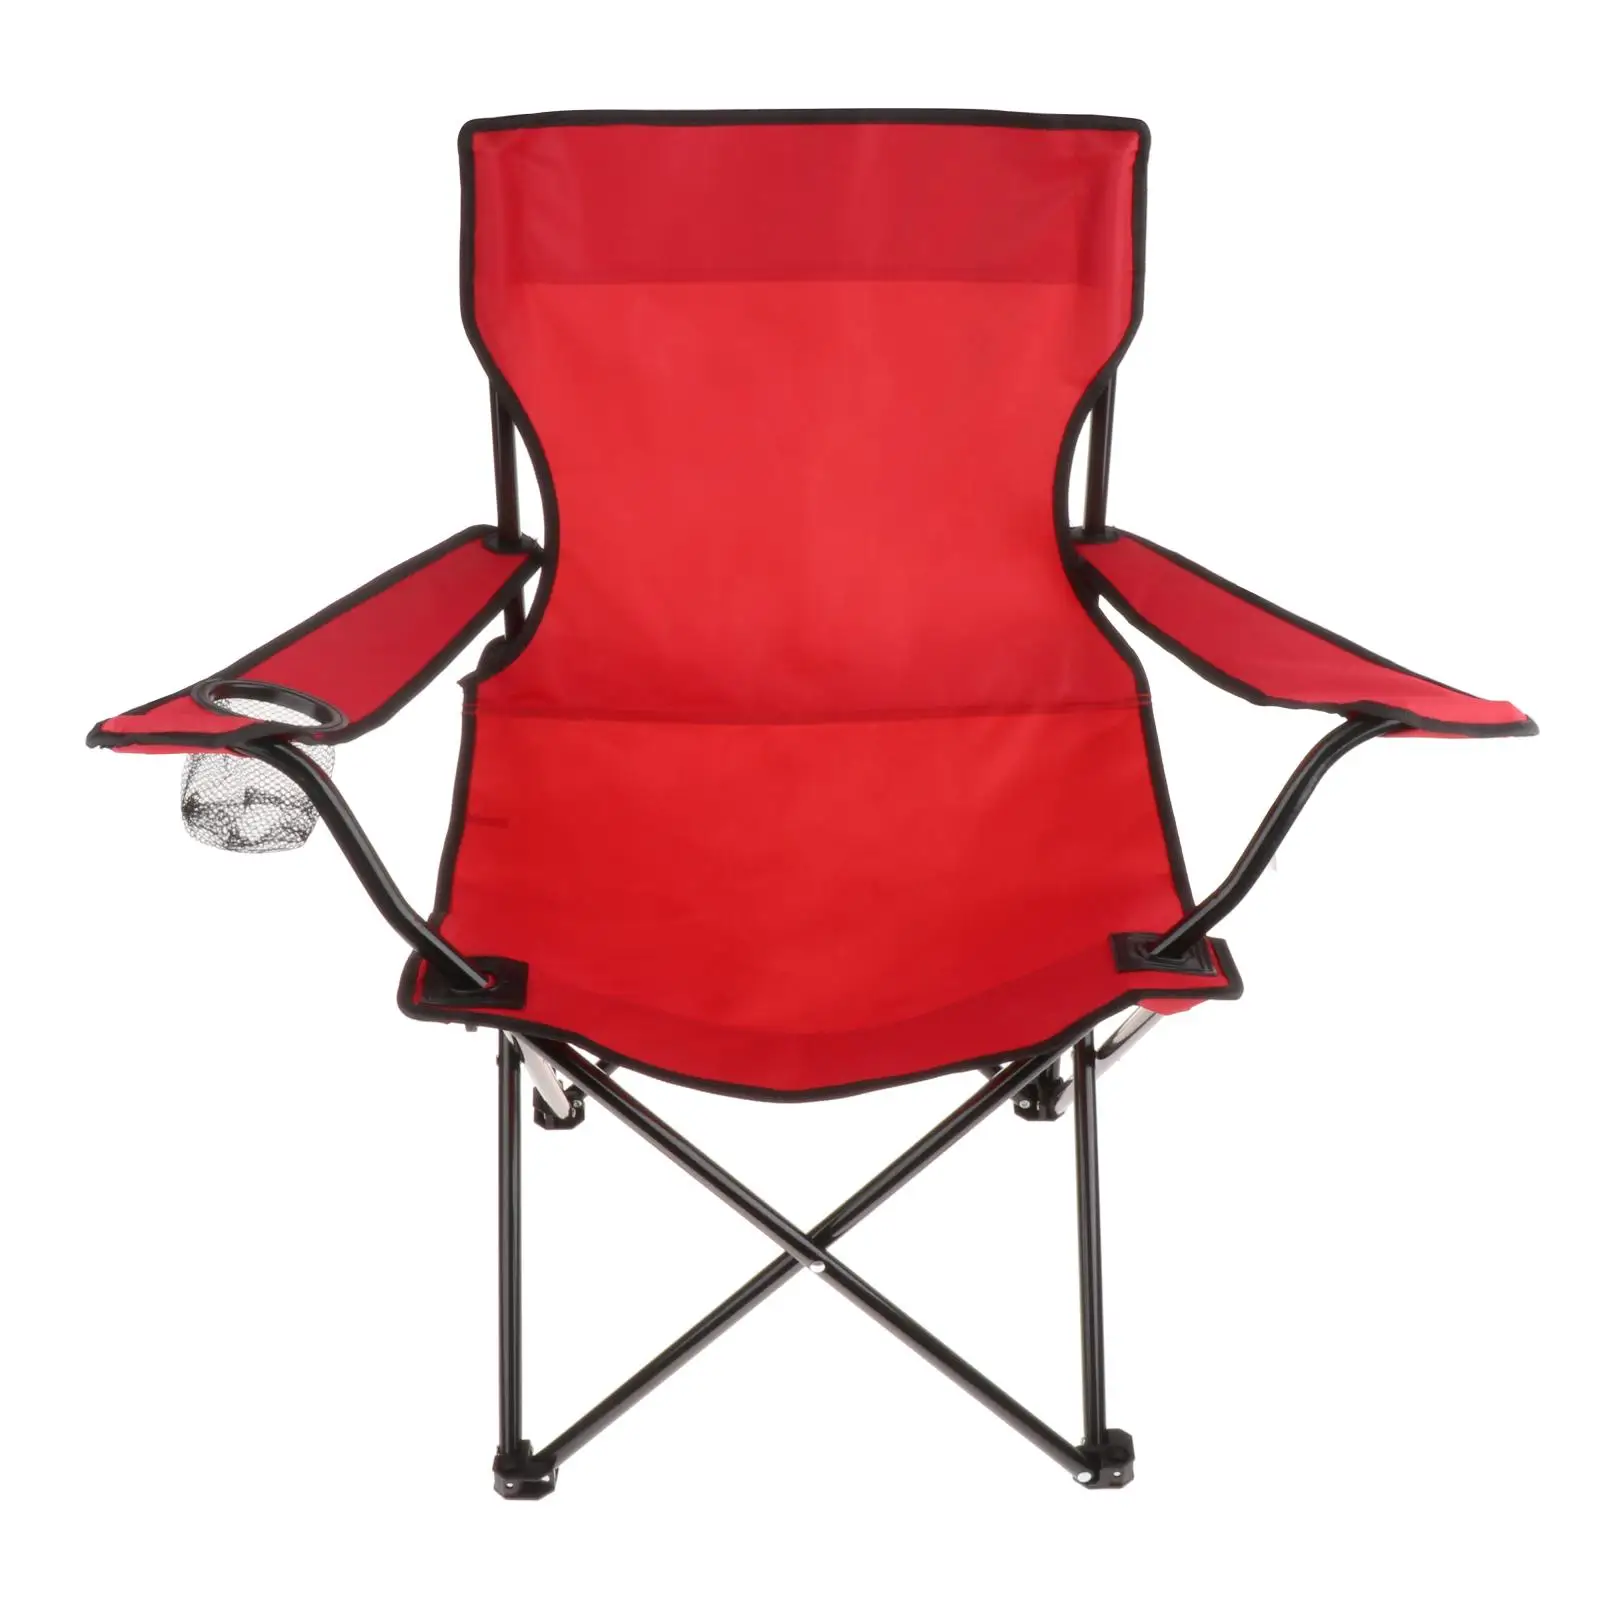 Patio Furniture Folding Camping Chair Beach Fishing Picnic Camp Seat Cup Holder